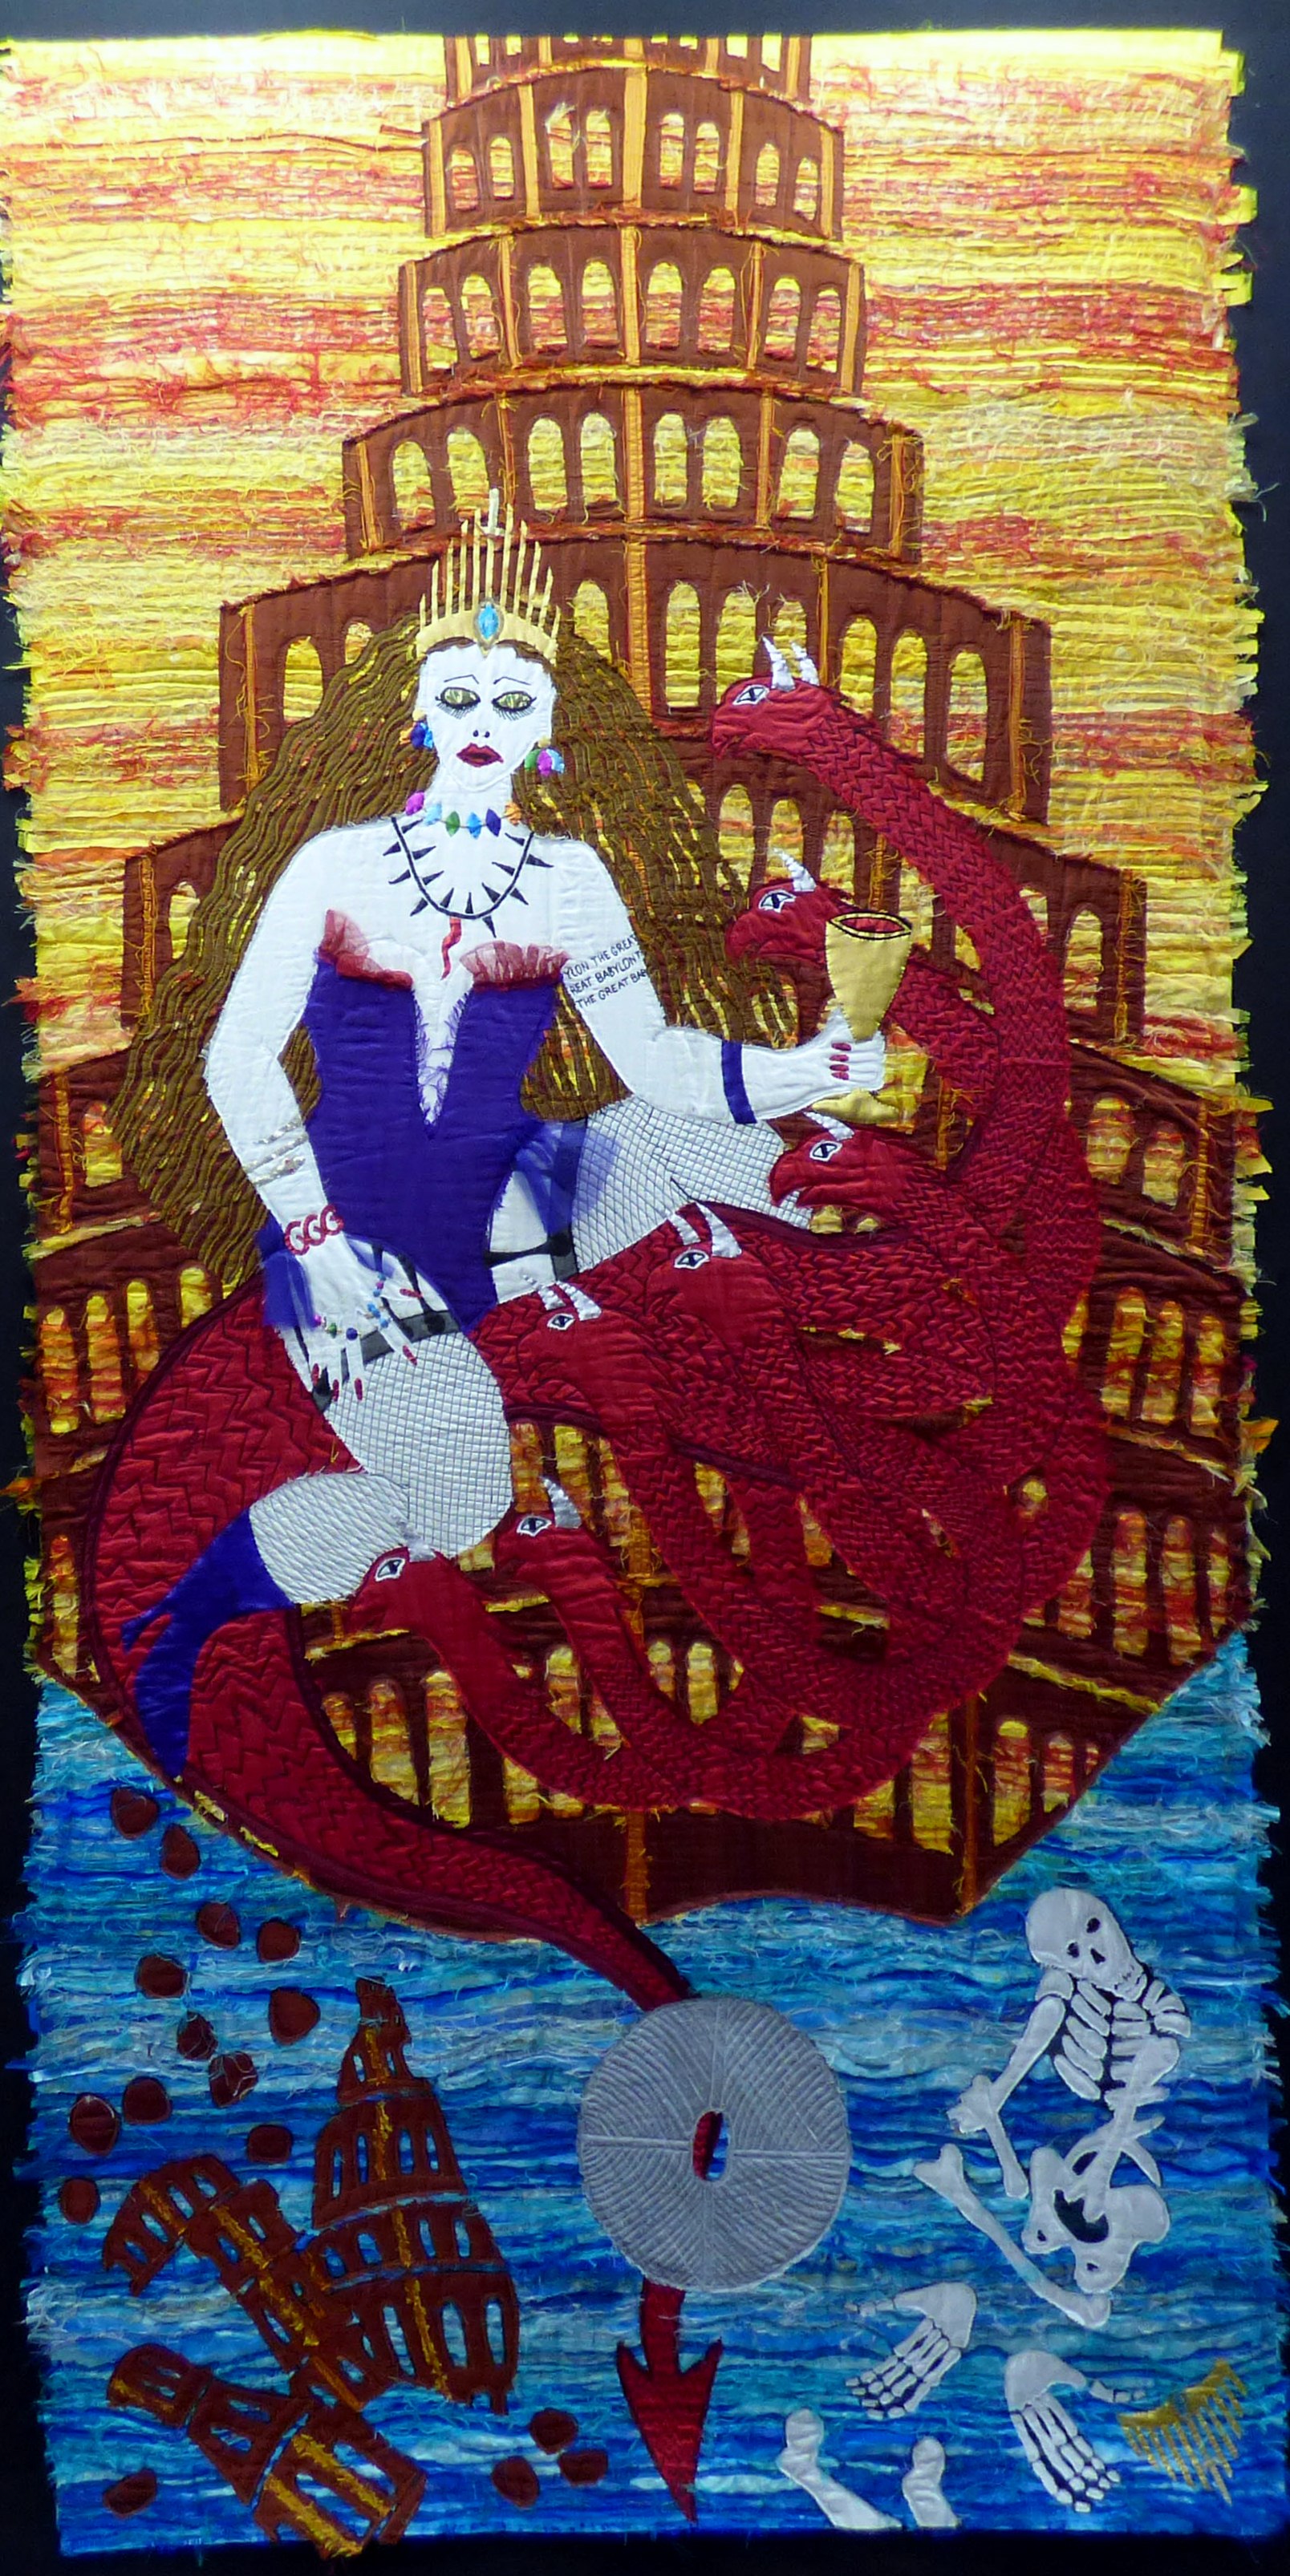 BEAUTY AND THE BEAST by Jacqui Parkinson, Threads Through Revelation exhibition 2017